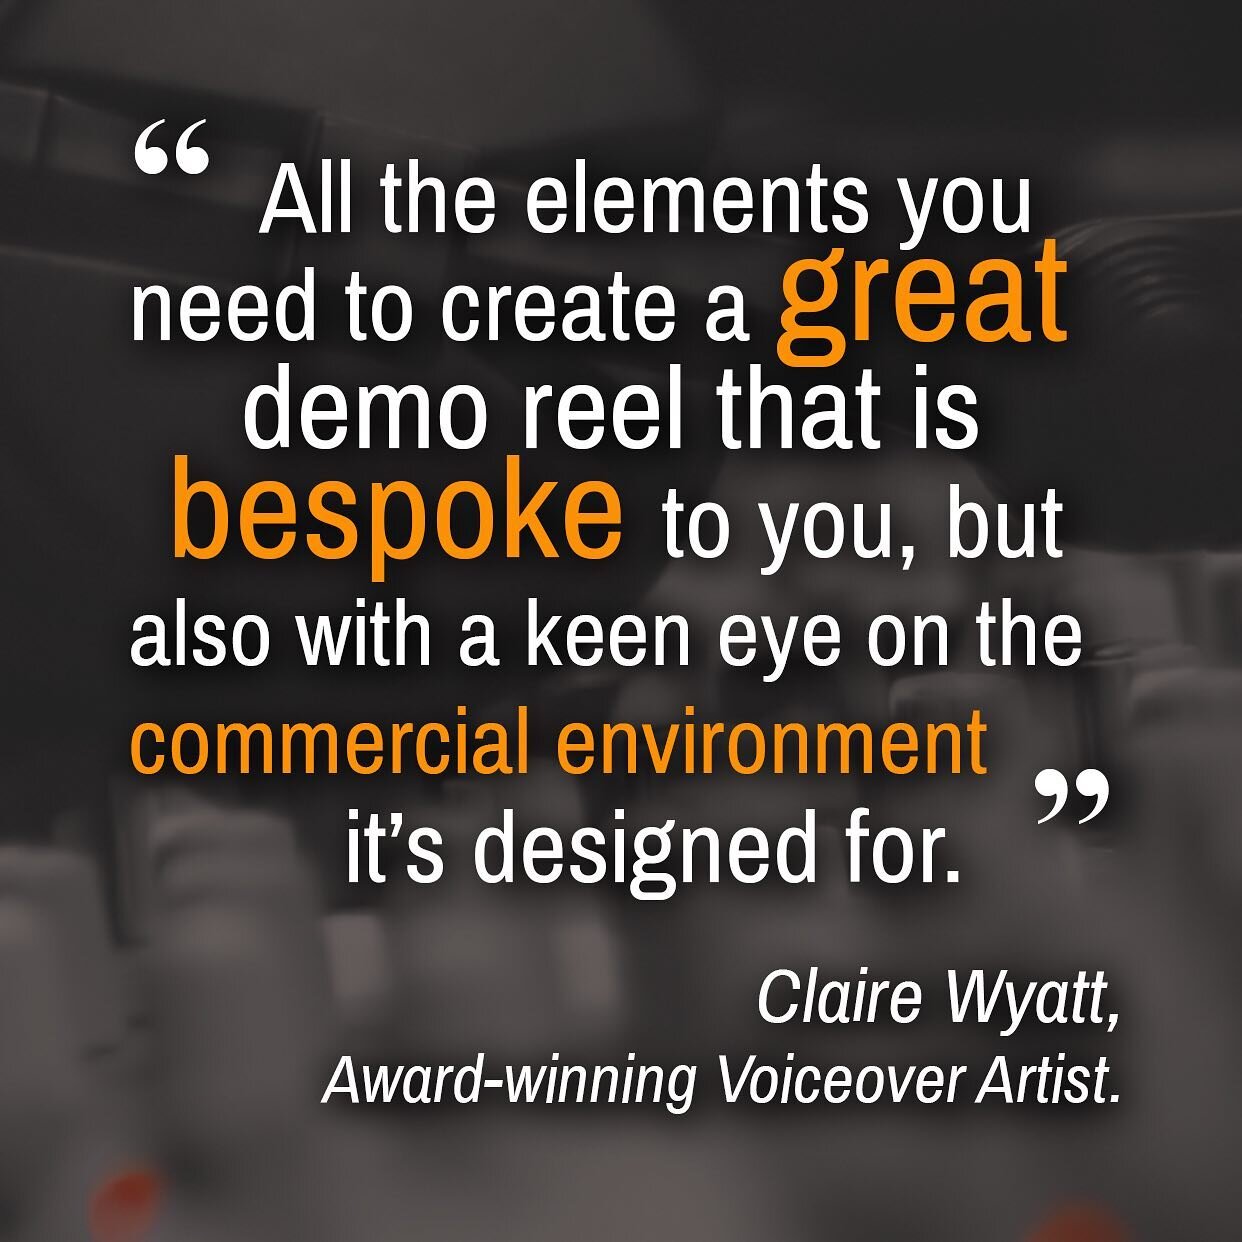 At Voice Lab, we know that a #voiceovershowreel isn&rsquo;t an end in itself. 
It should position you in the market, reinforce your core brand and open new doors. 
@clairewyatt &lsquo;s lovely testimonial spells this out beautifully. 
Thanks so much 